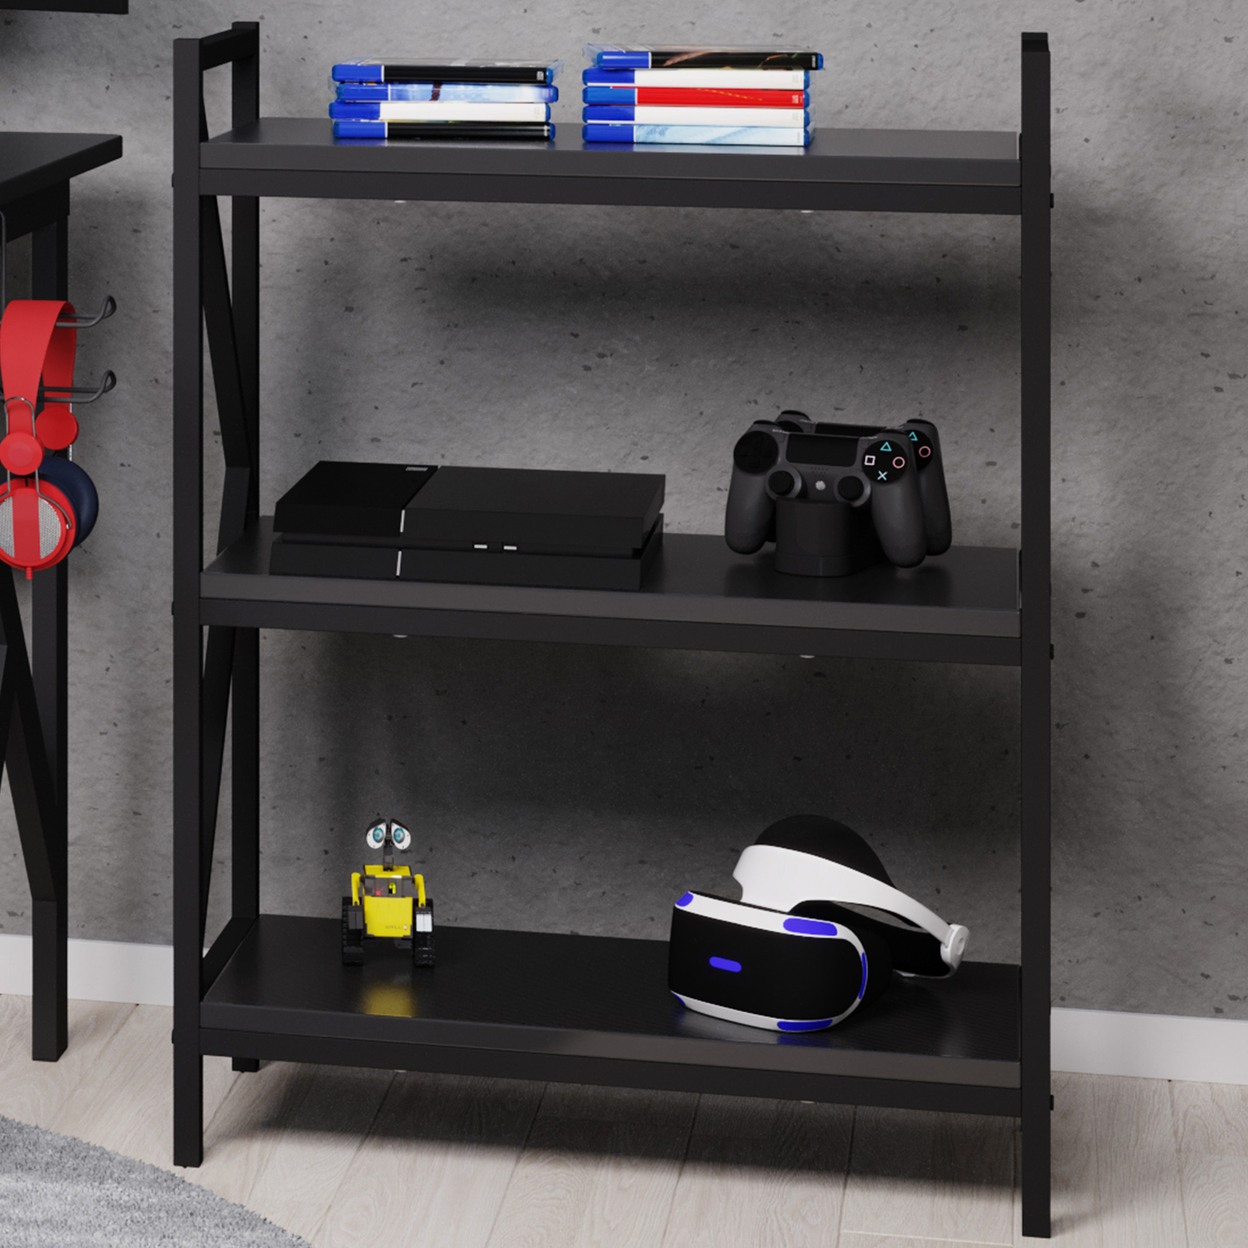 3-Shelf Bookcase Console Table With Carbon Fiber Finish & K-Shaped Legs, Black